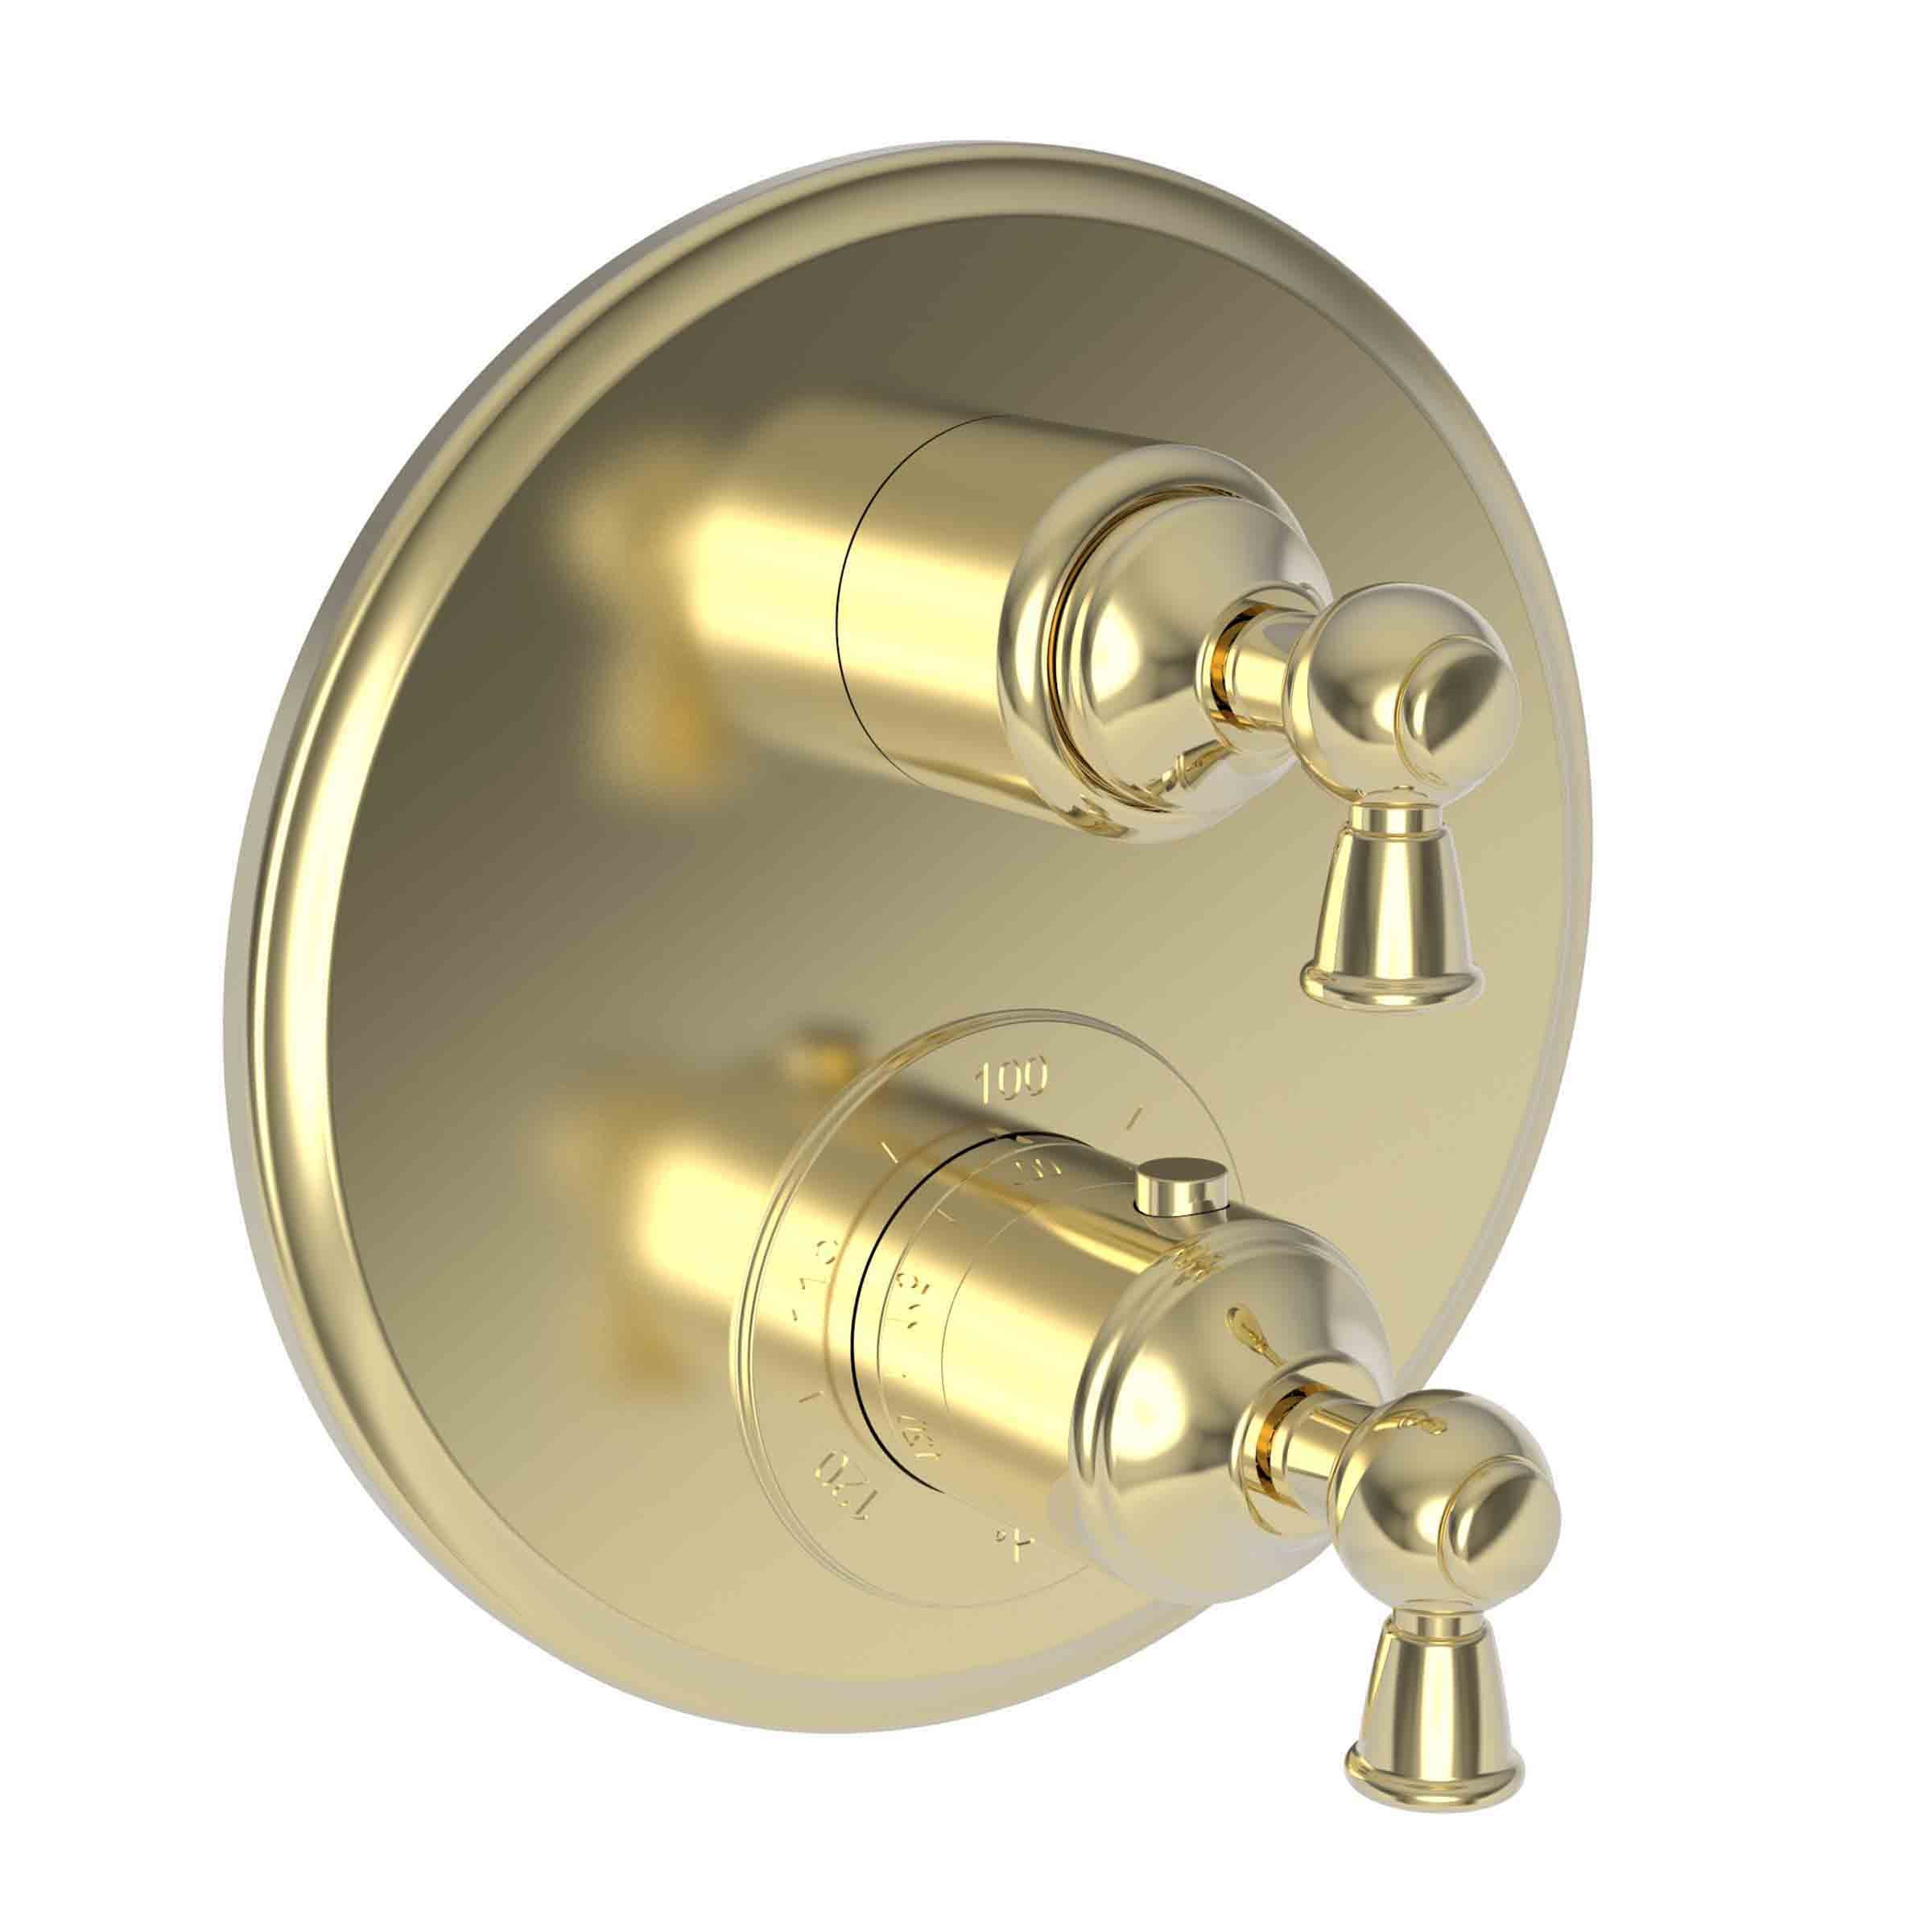 Newport Brass Aylesbury 1/2" Round Thermostatic Trim Plate with Handle